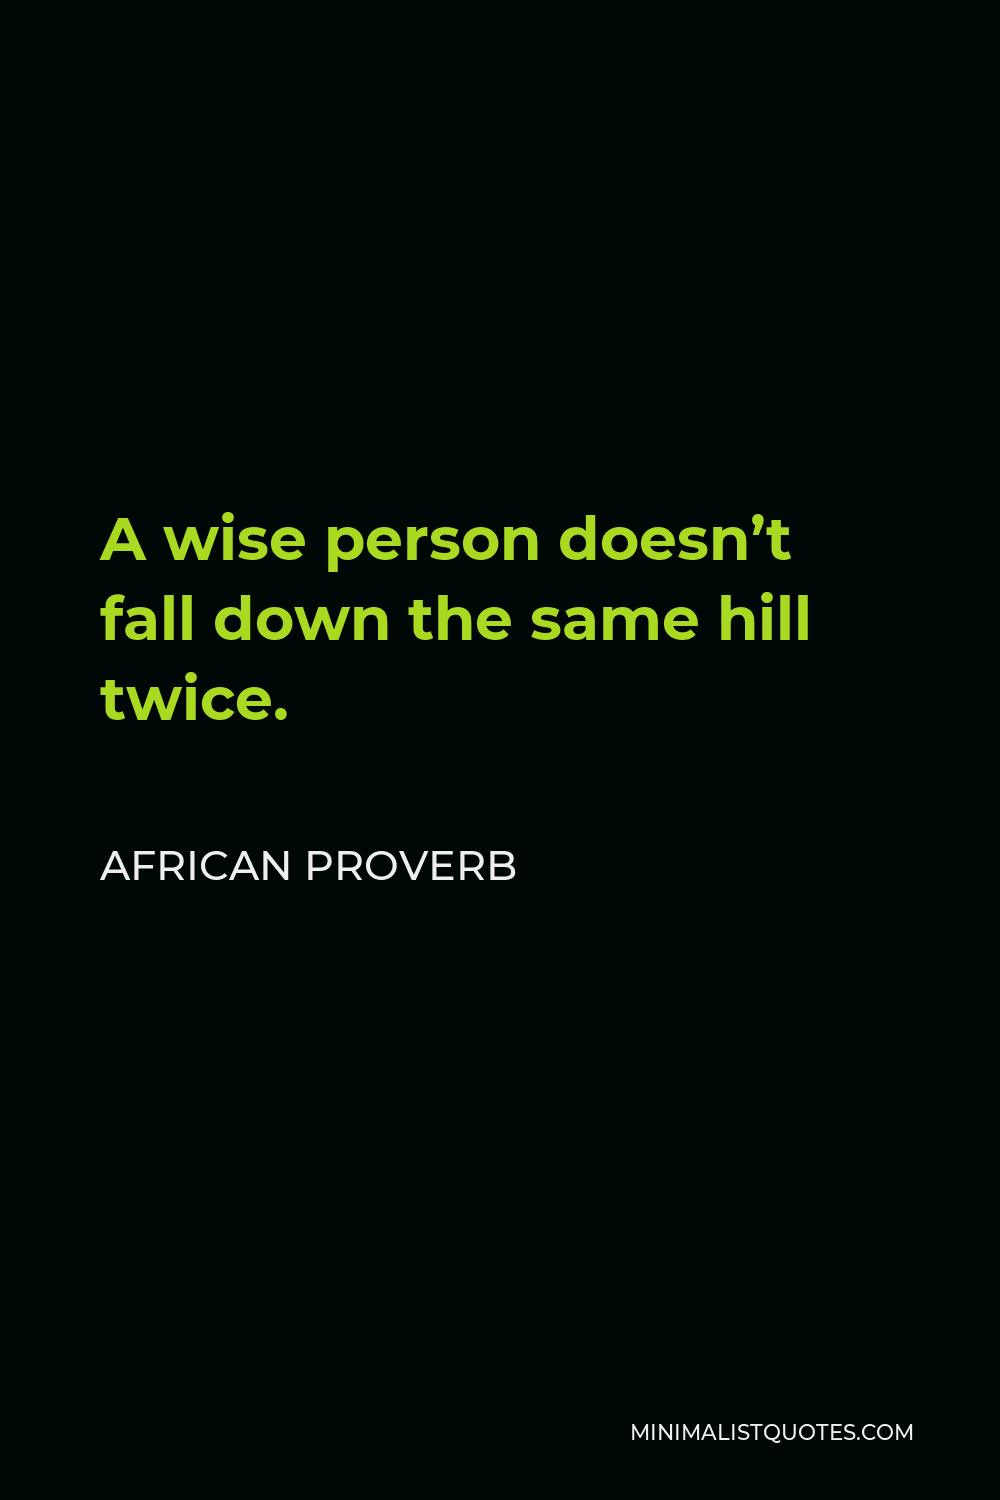 African Proverb Quote - A wise person doesn’t fall down the same hill twice.